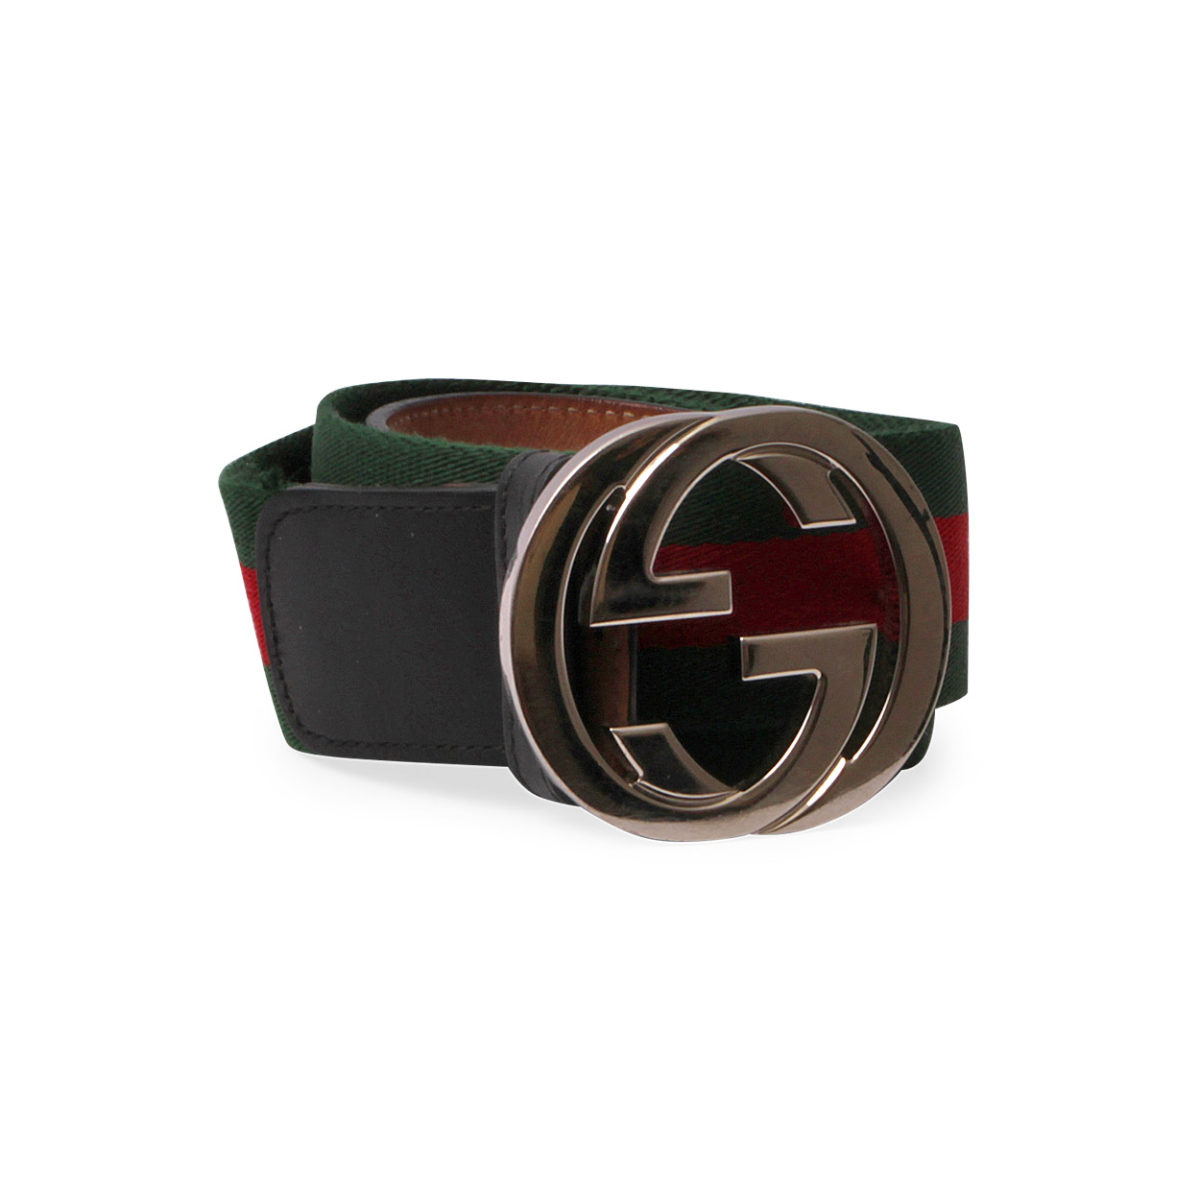 green and red gucci belt with black buckle